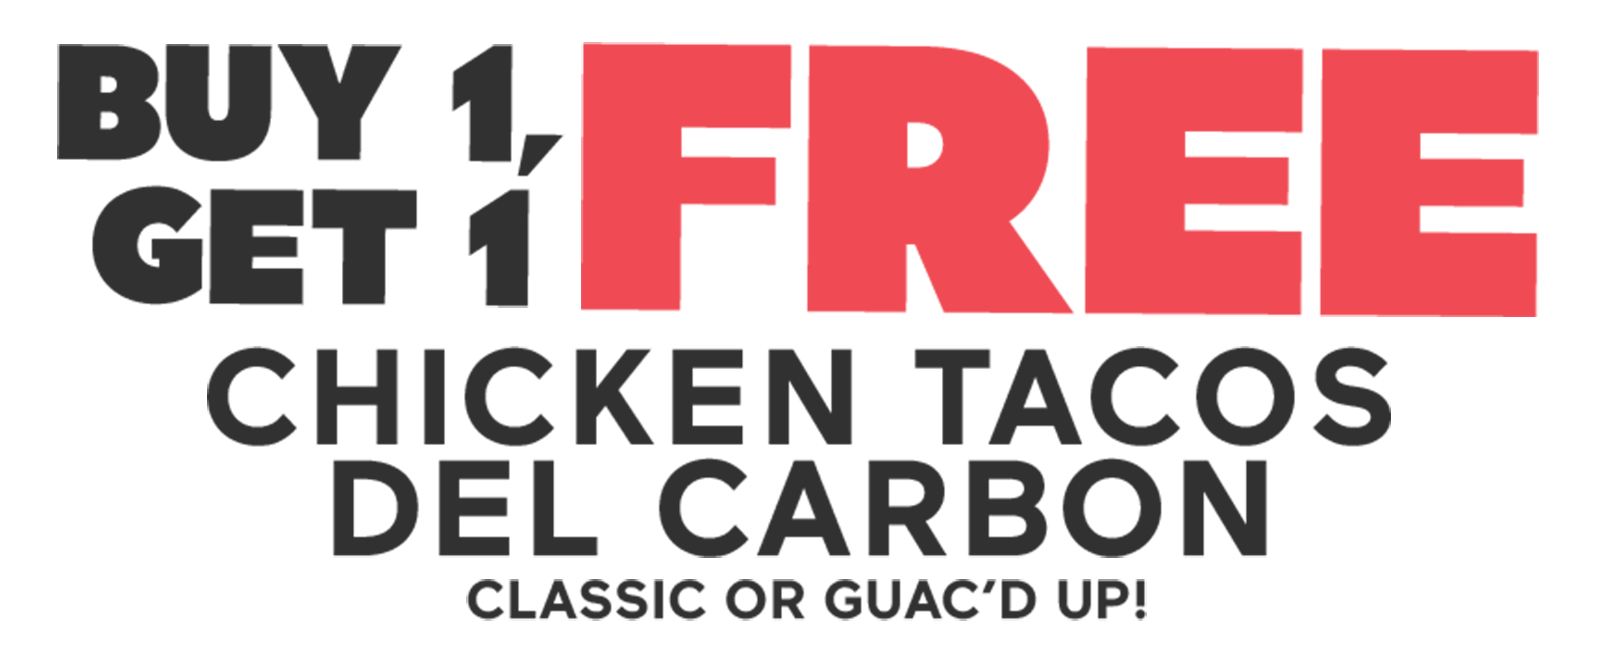 Buy 1, Get 1 Free Chicken Tacos Del Carbon Classic or Guac'd Up!